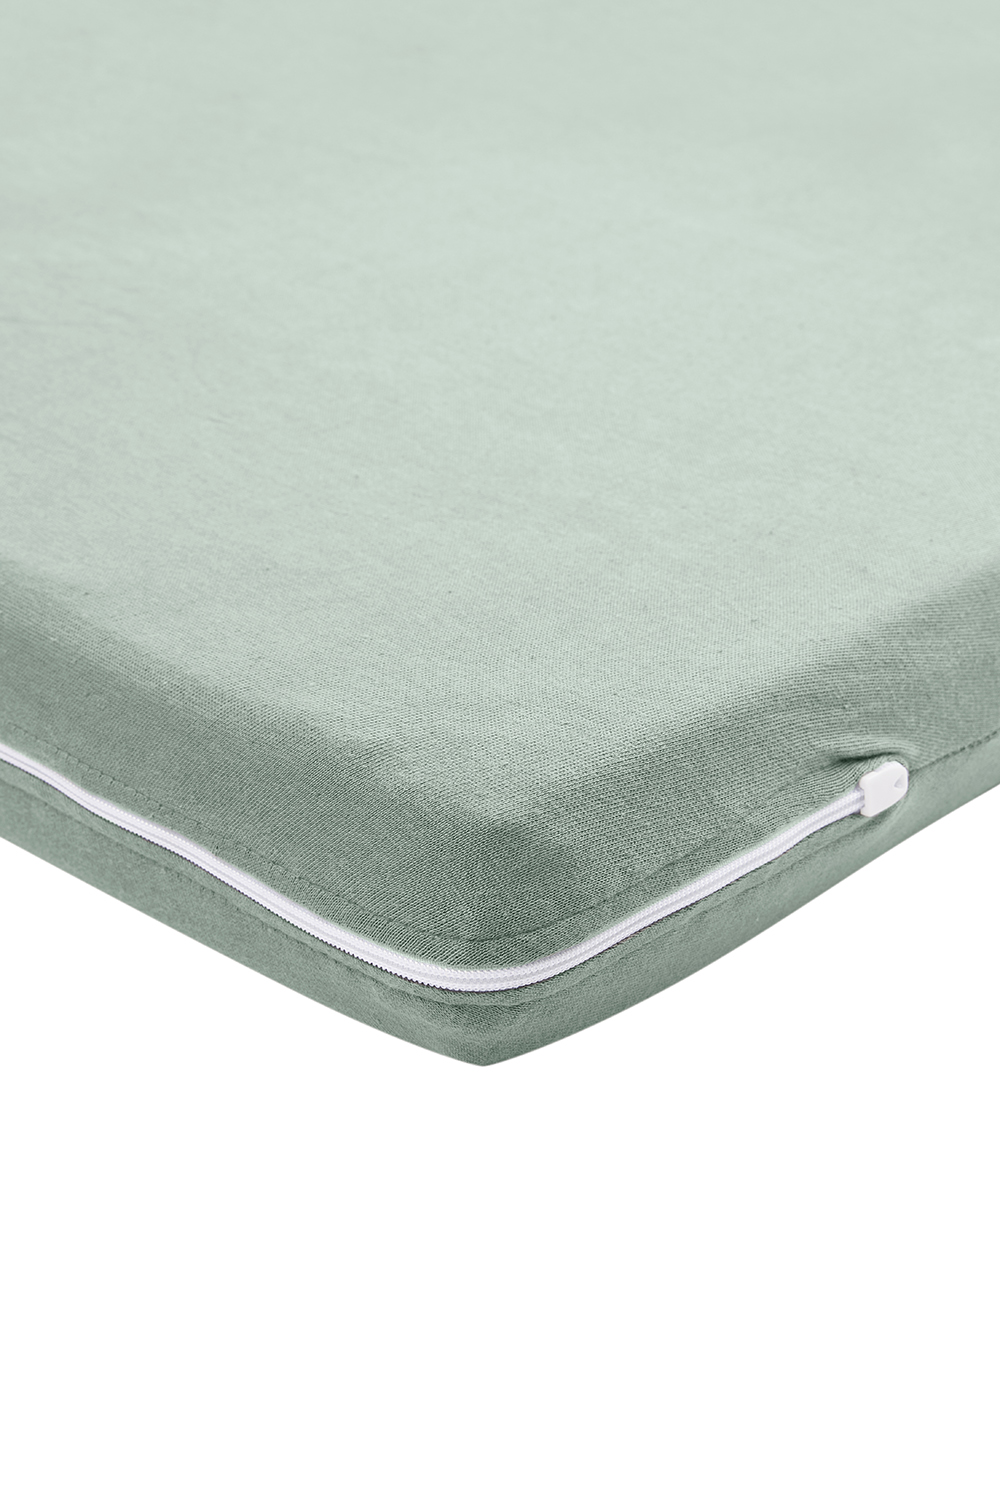 Jersey Campingbed Mattress Cover - Stone Green - 60X120cm